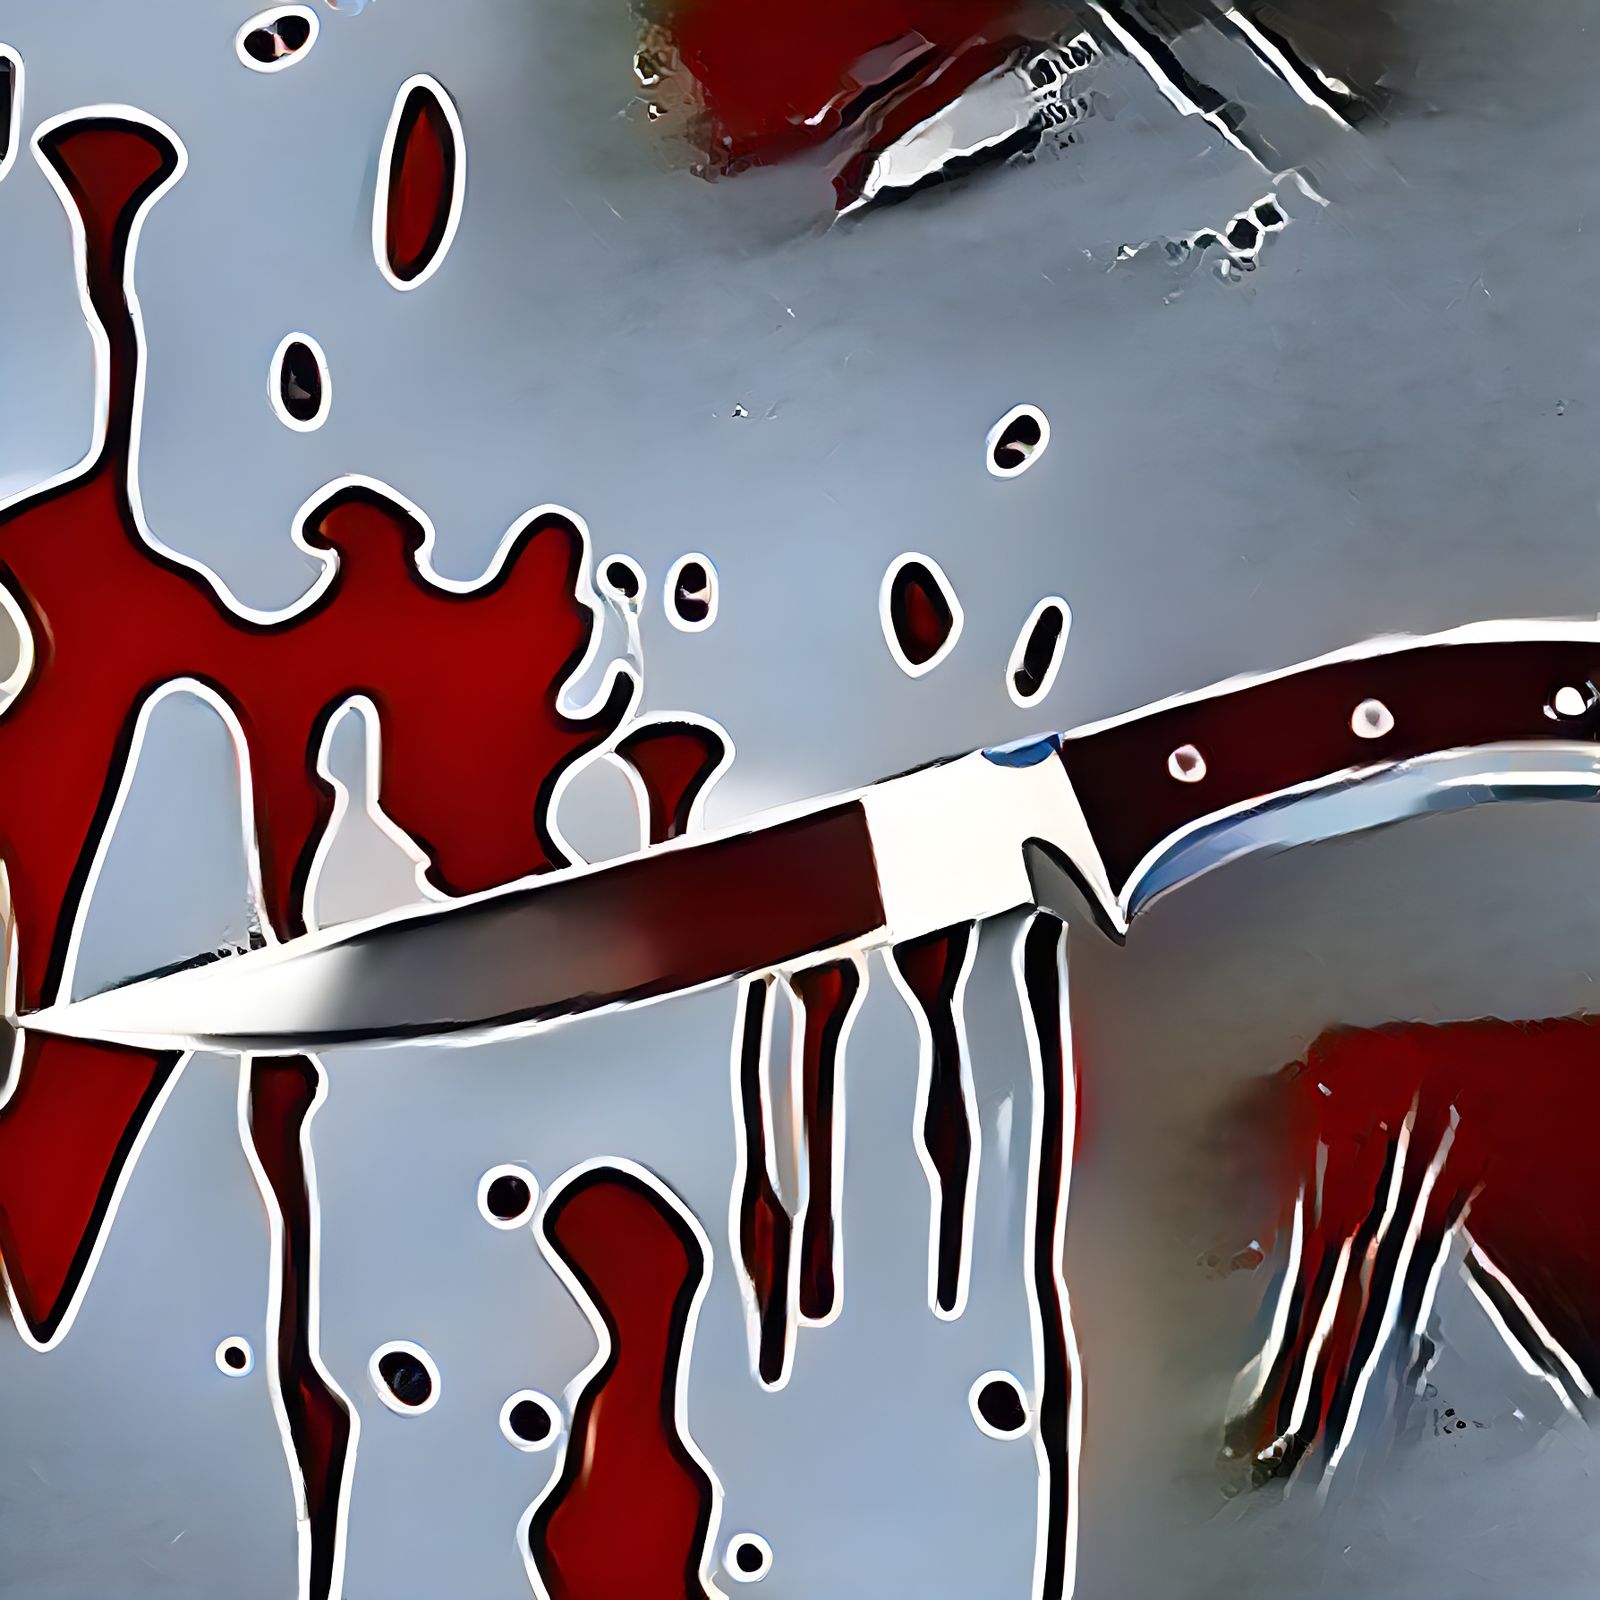 how to draw a knife with blood